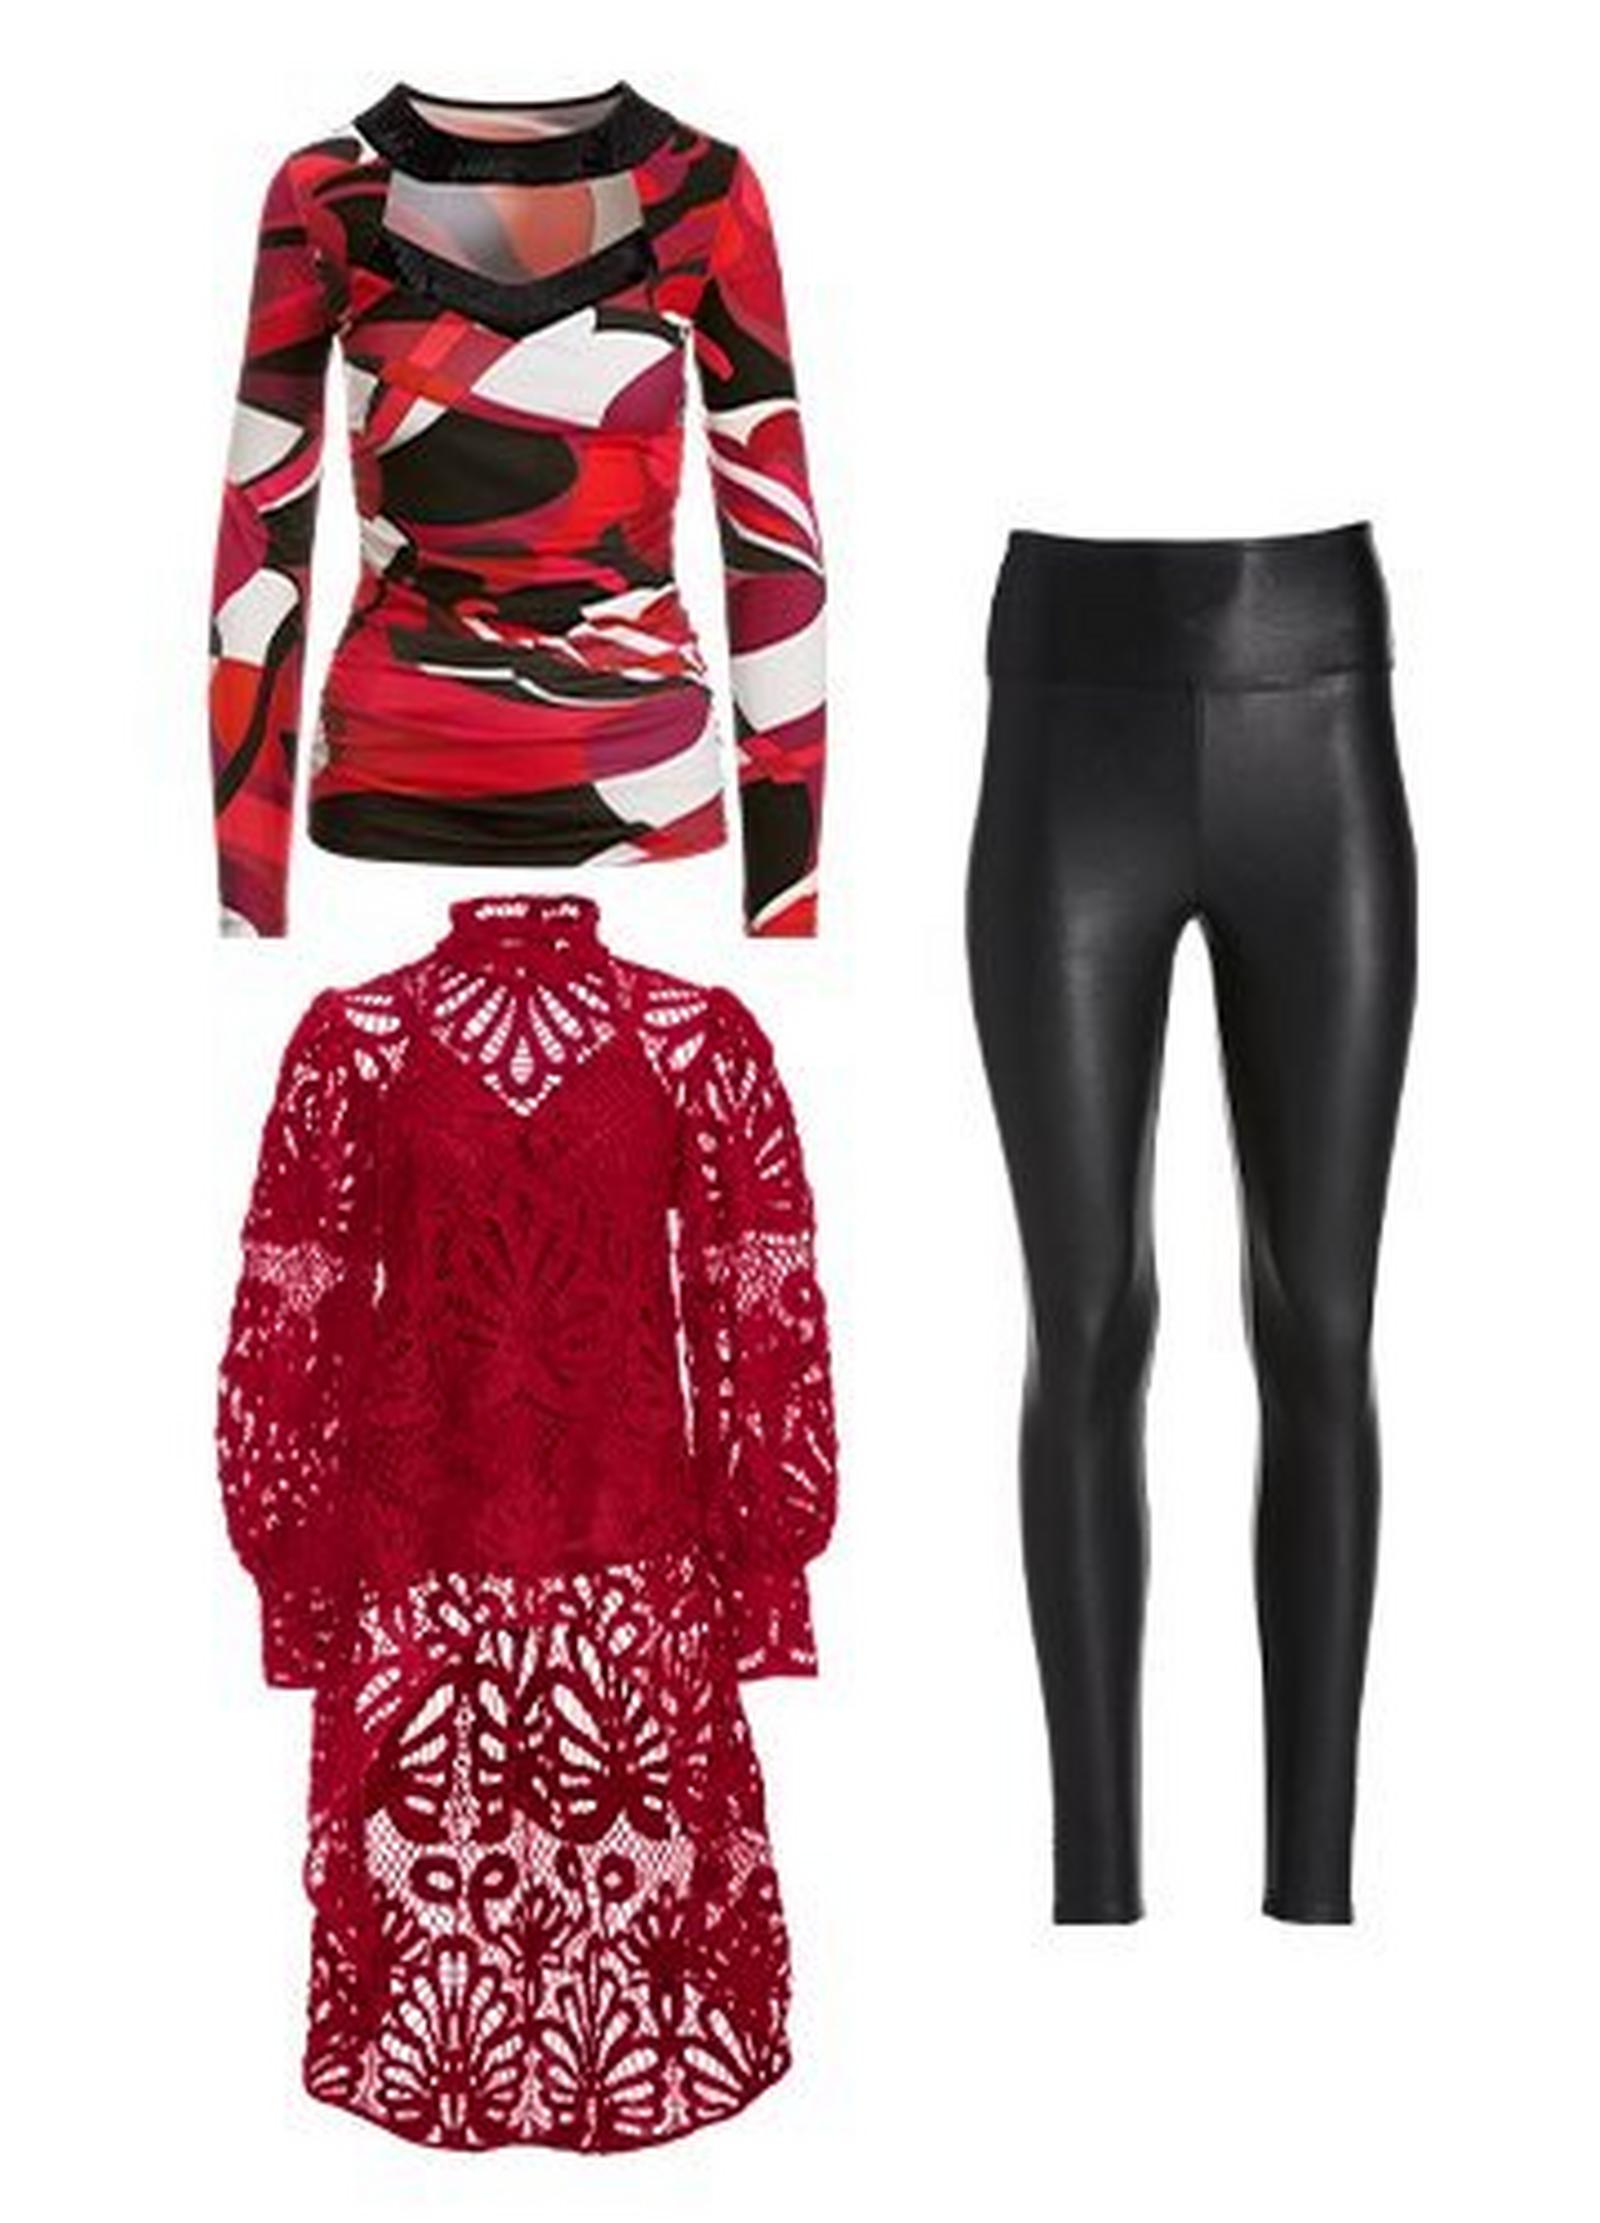 white, black, and red cutout sequin embellished long-sleeve top, red lace mock-neck high-low top, and black faux-leather leggings.